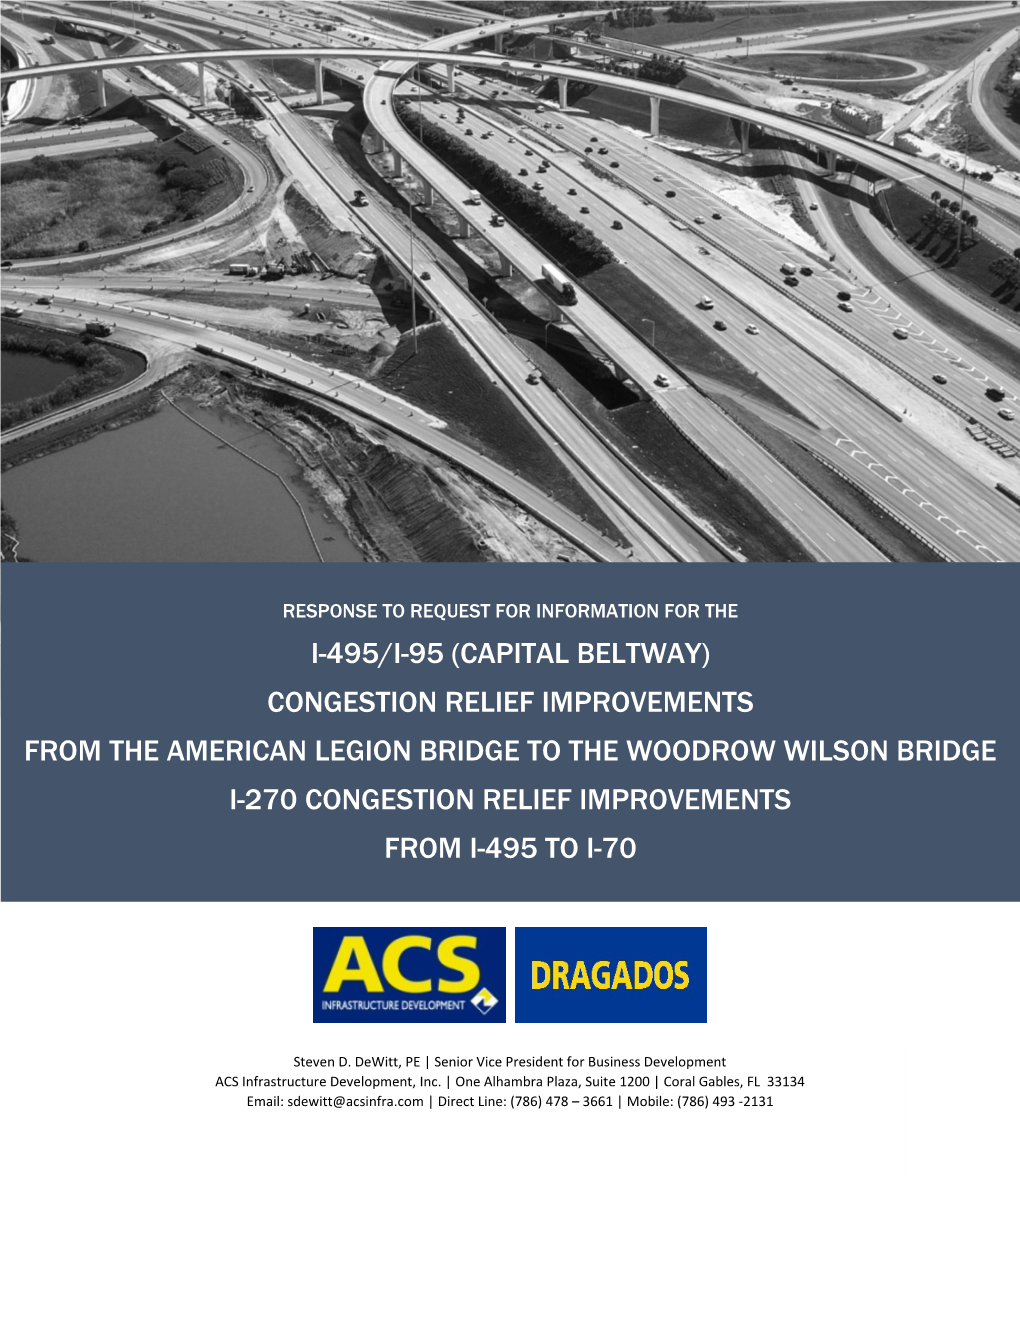 Capital Beltway) Congestion Relief Improvements from the American Legion Bridge to the Woodrow Wilson Bridge I-270 Congestion Relief Improvements from I-495 to I-70